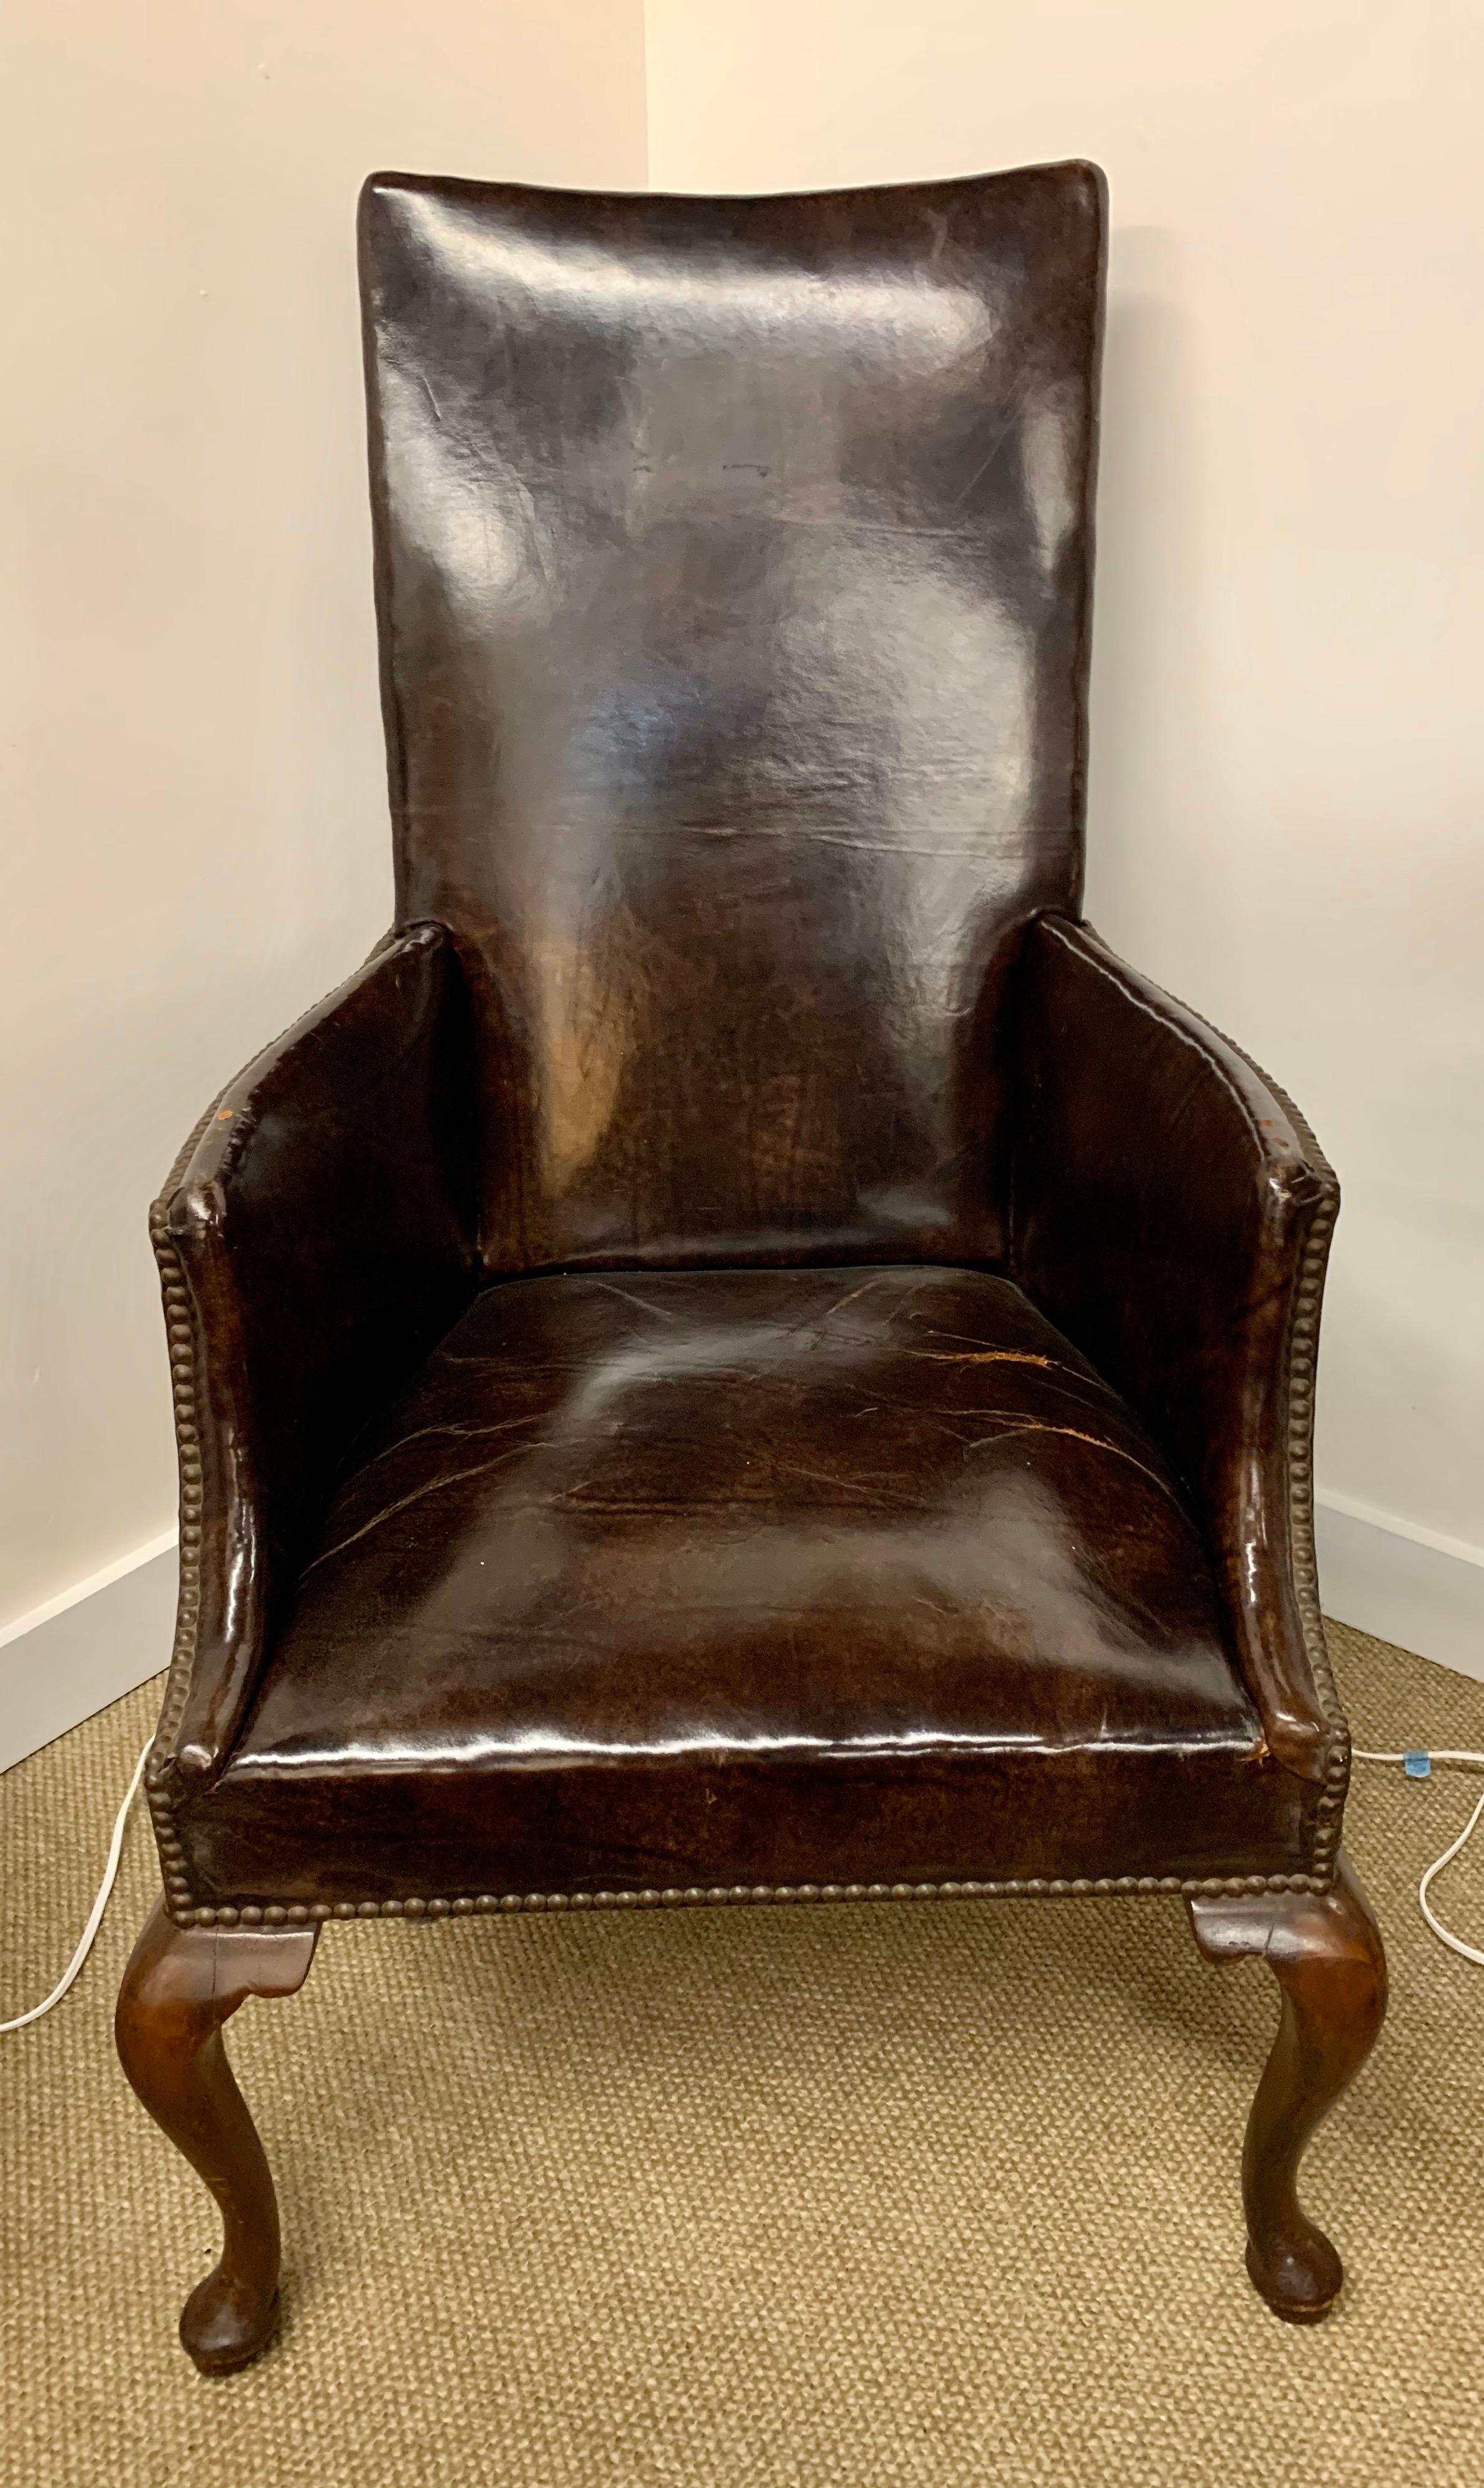 Elegant antique brown leather reading chair adorned with brass nailheads and mahogany base, all original. The patina on the leather is broken in just perfect. This piece is guaranteed to make an immediate statement in any room. All dimensions are